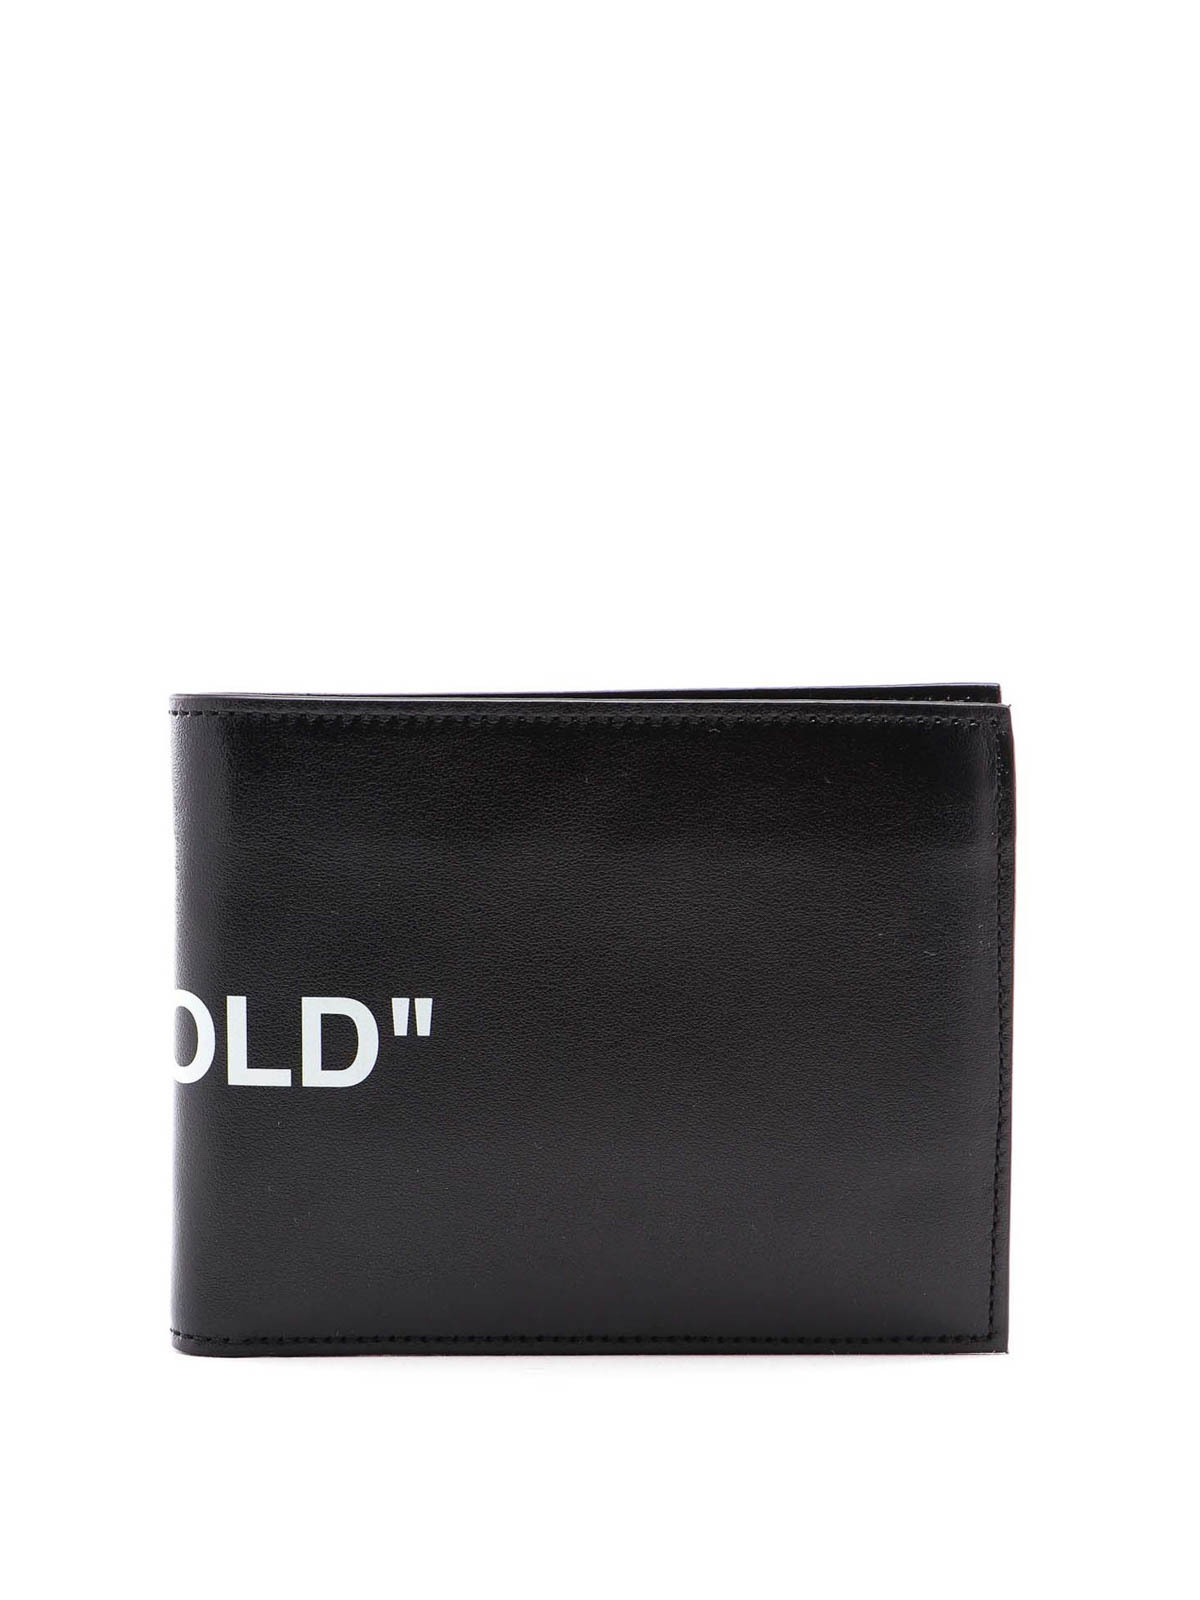 Off-White Quote Printed Leather Billfold Wallet - Men - Black Wallets